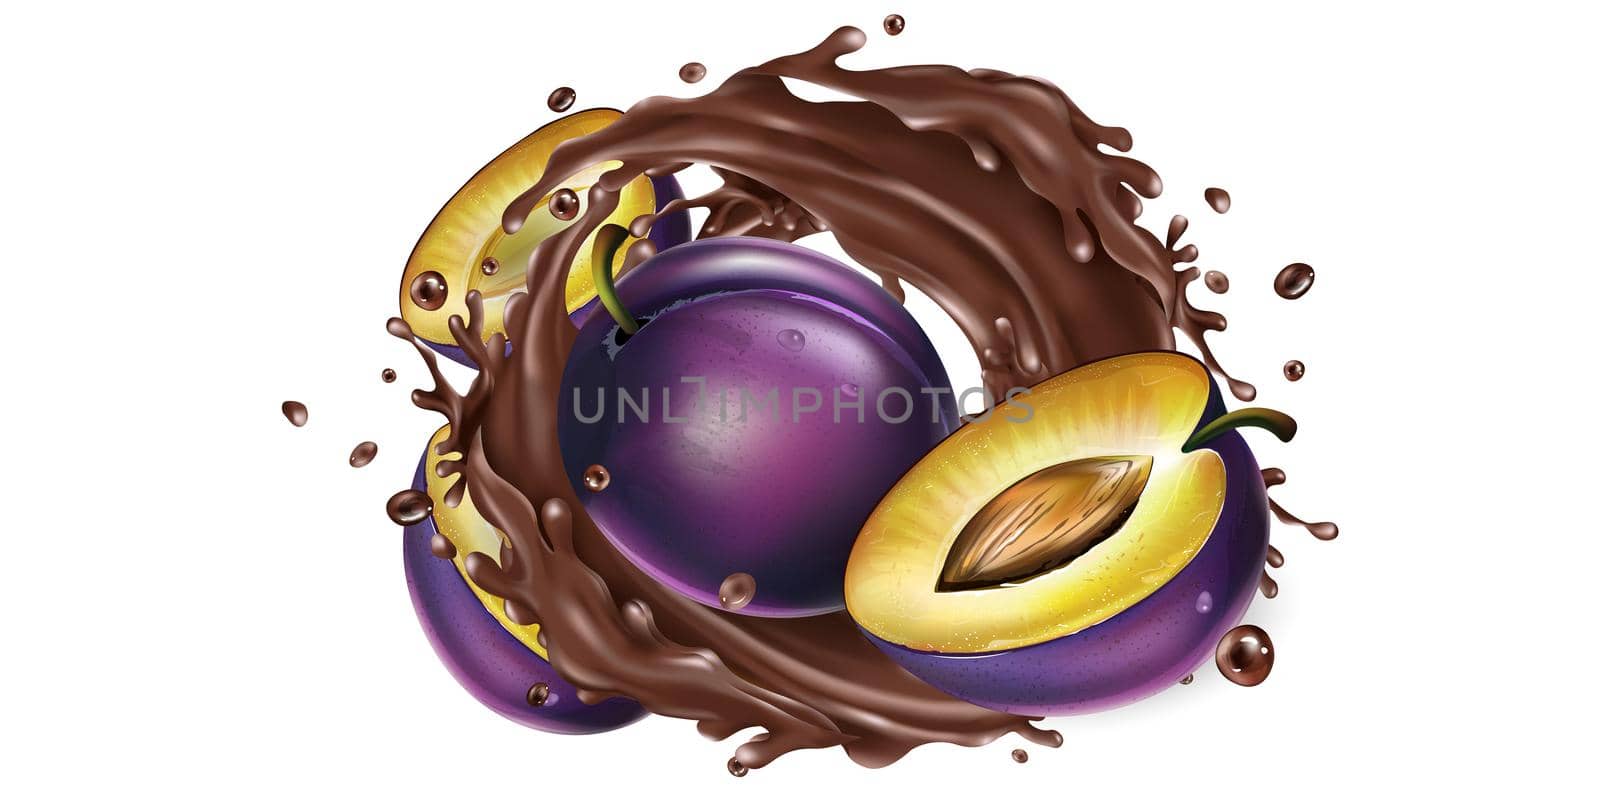 Fresh plums and a splash of liquid chocolate on a white background. Realistic style illustration.